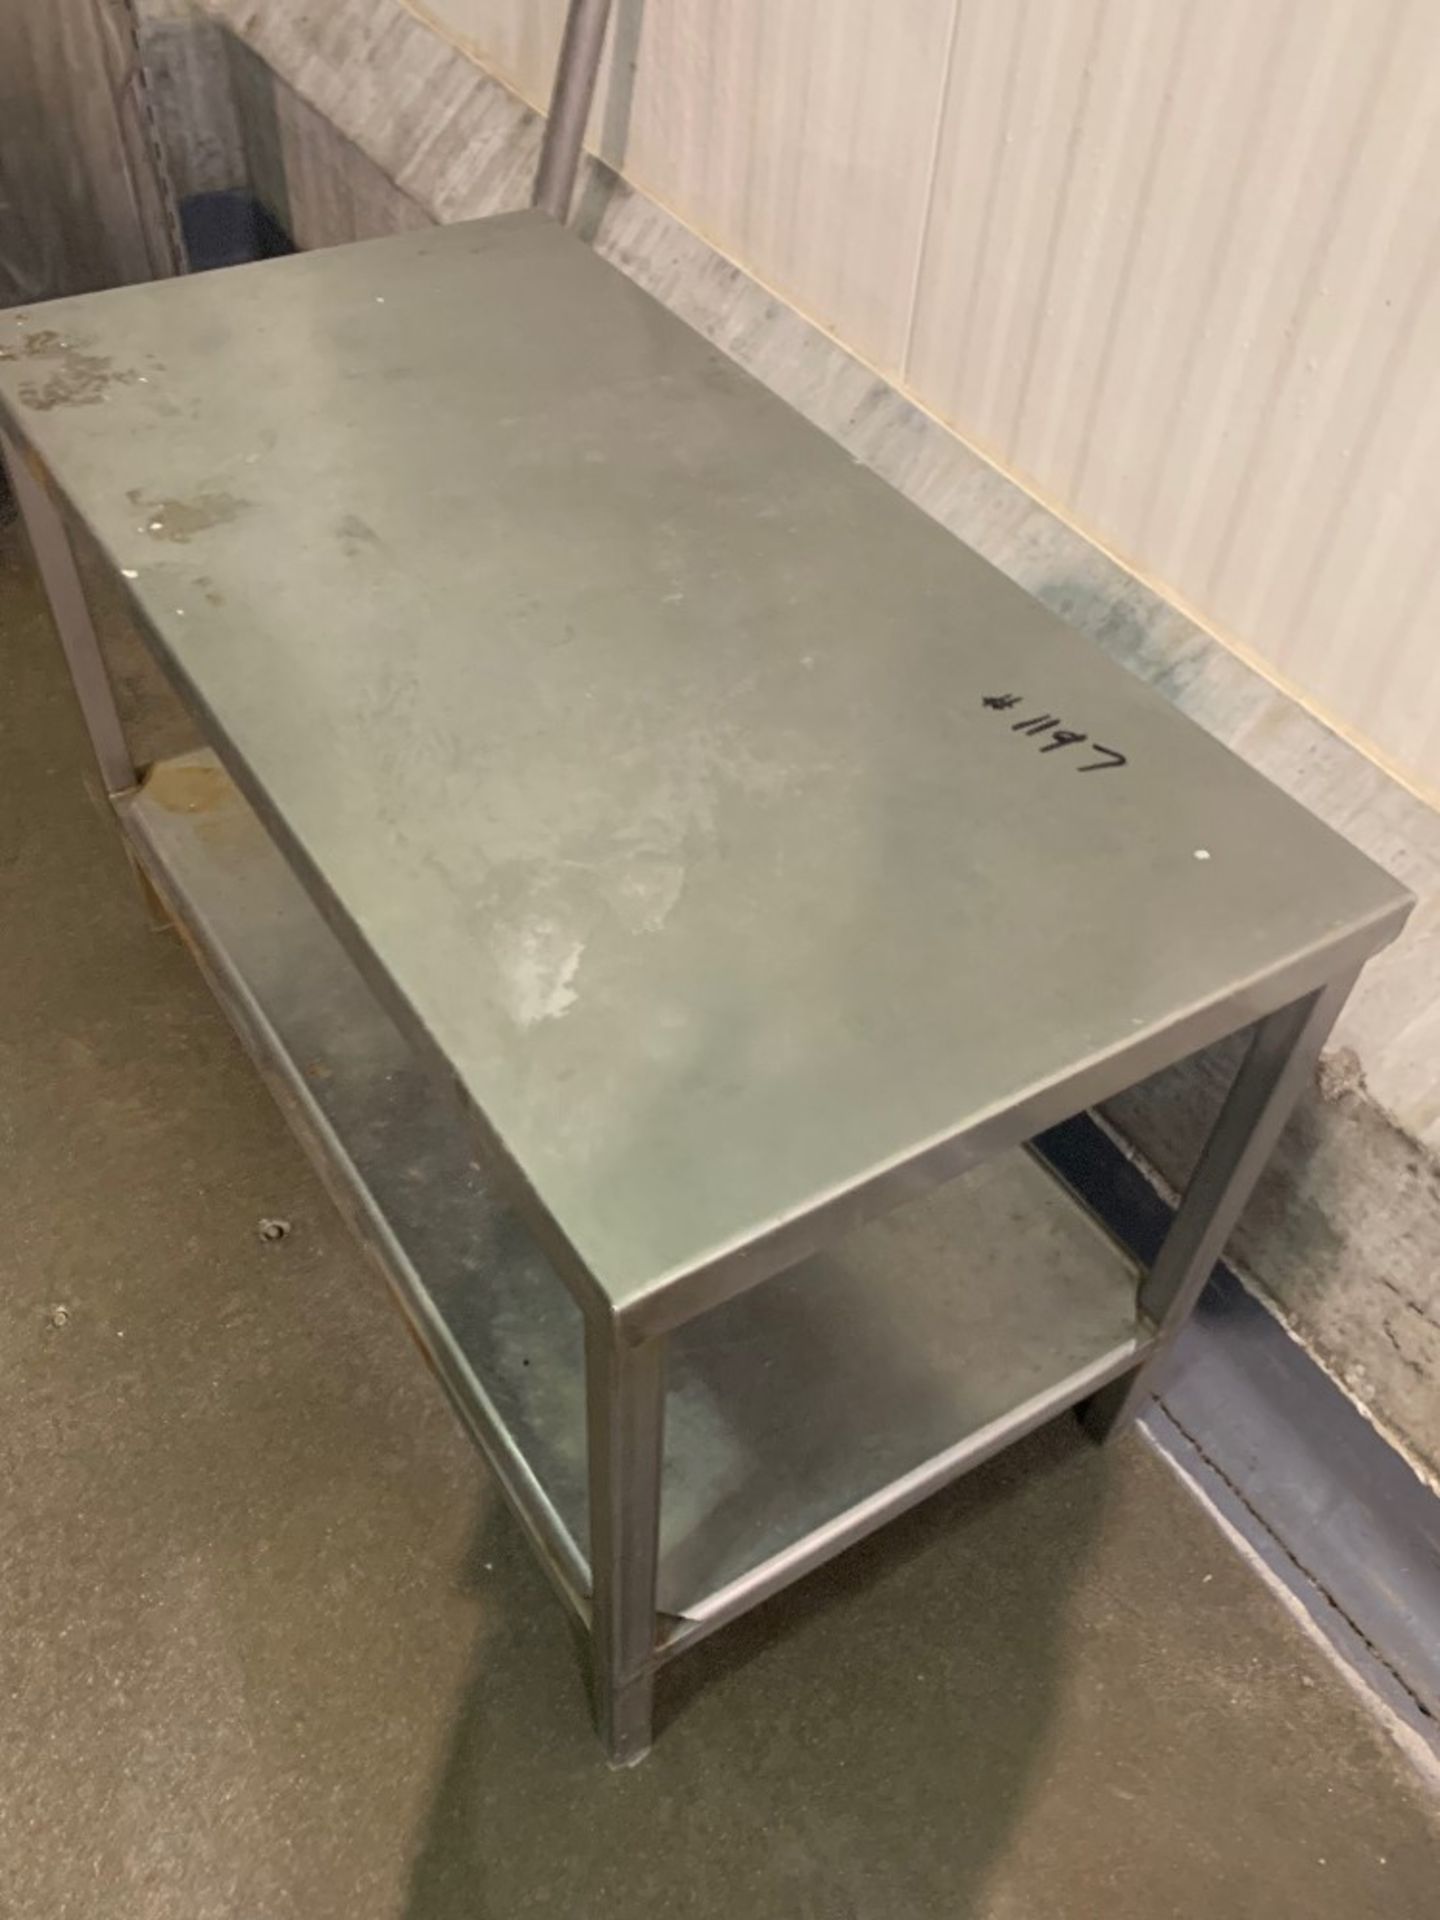 Lot Stainless Steel Parts Cart, (5) Stainless Steel Tables, Stainless Steel Cabinet, 6' Long - Image 6 of 9